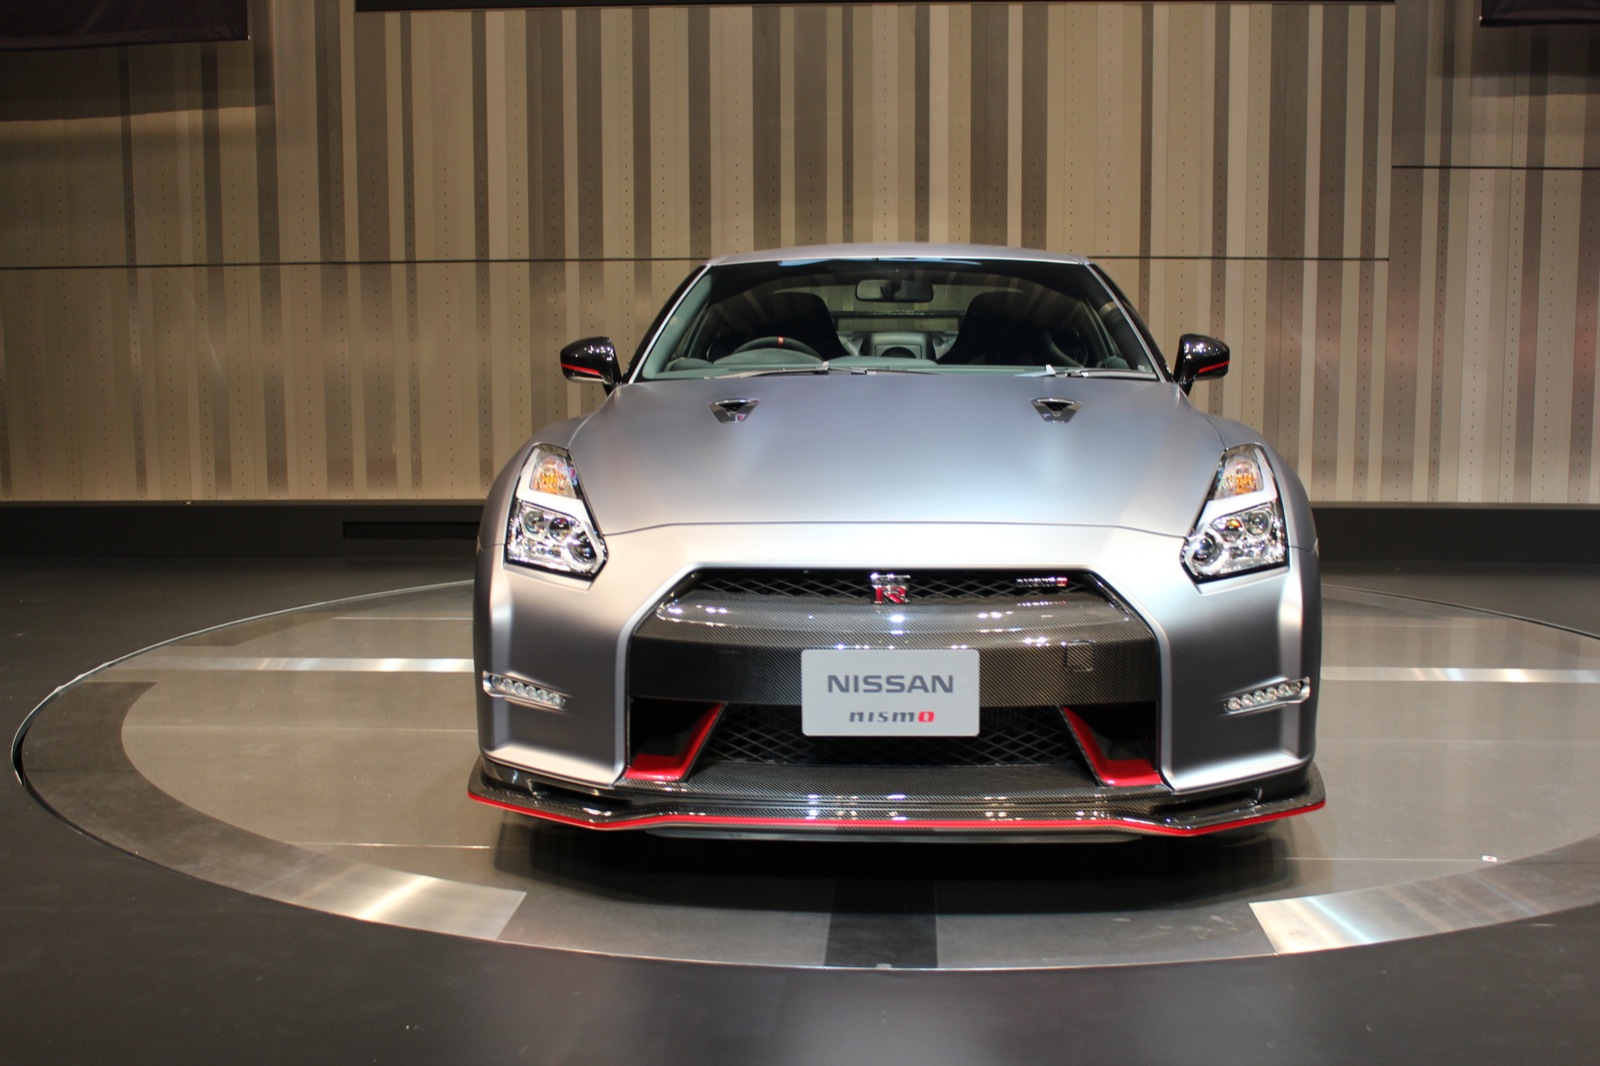 2015-nissan-gt-r-nismo--tokyo-motor-show-preview-event-nissan-global-headquarters_100446459_h